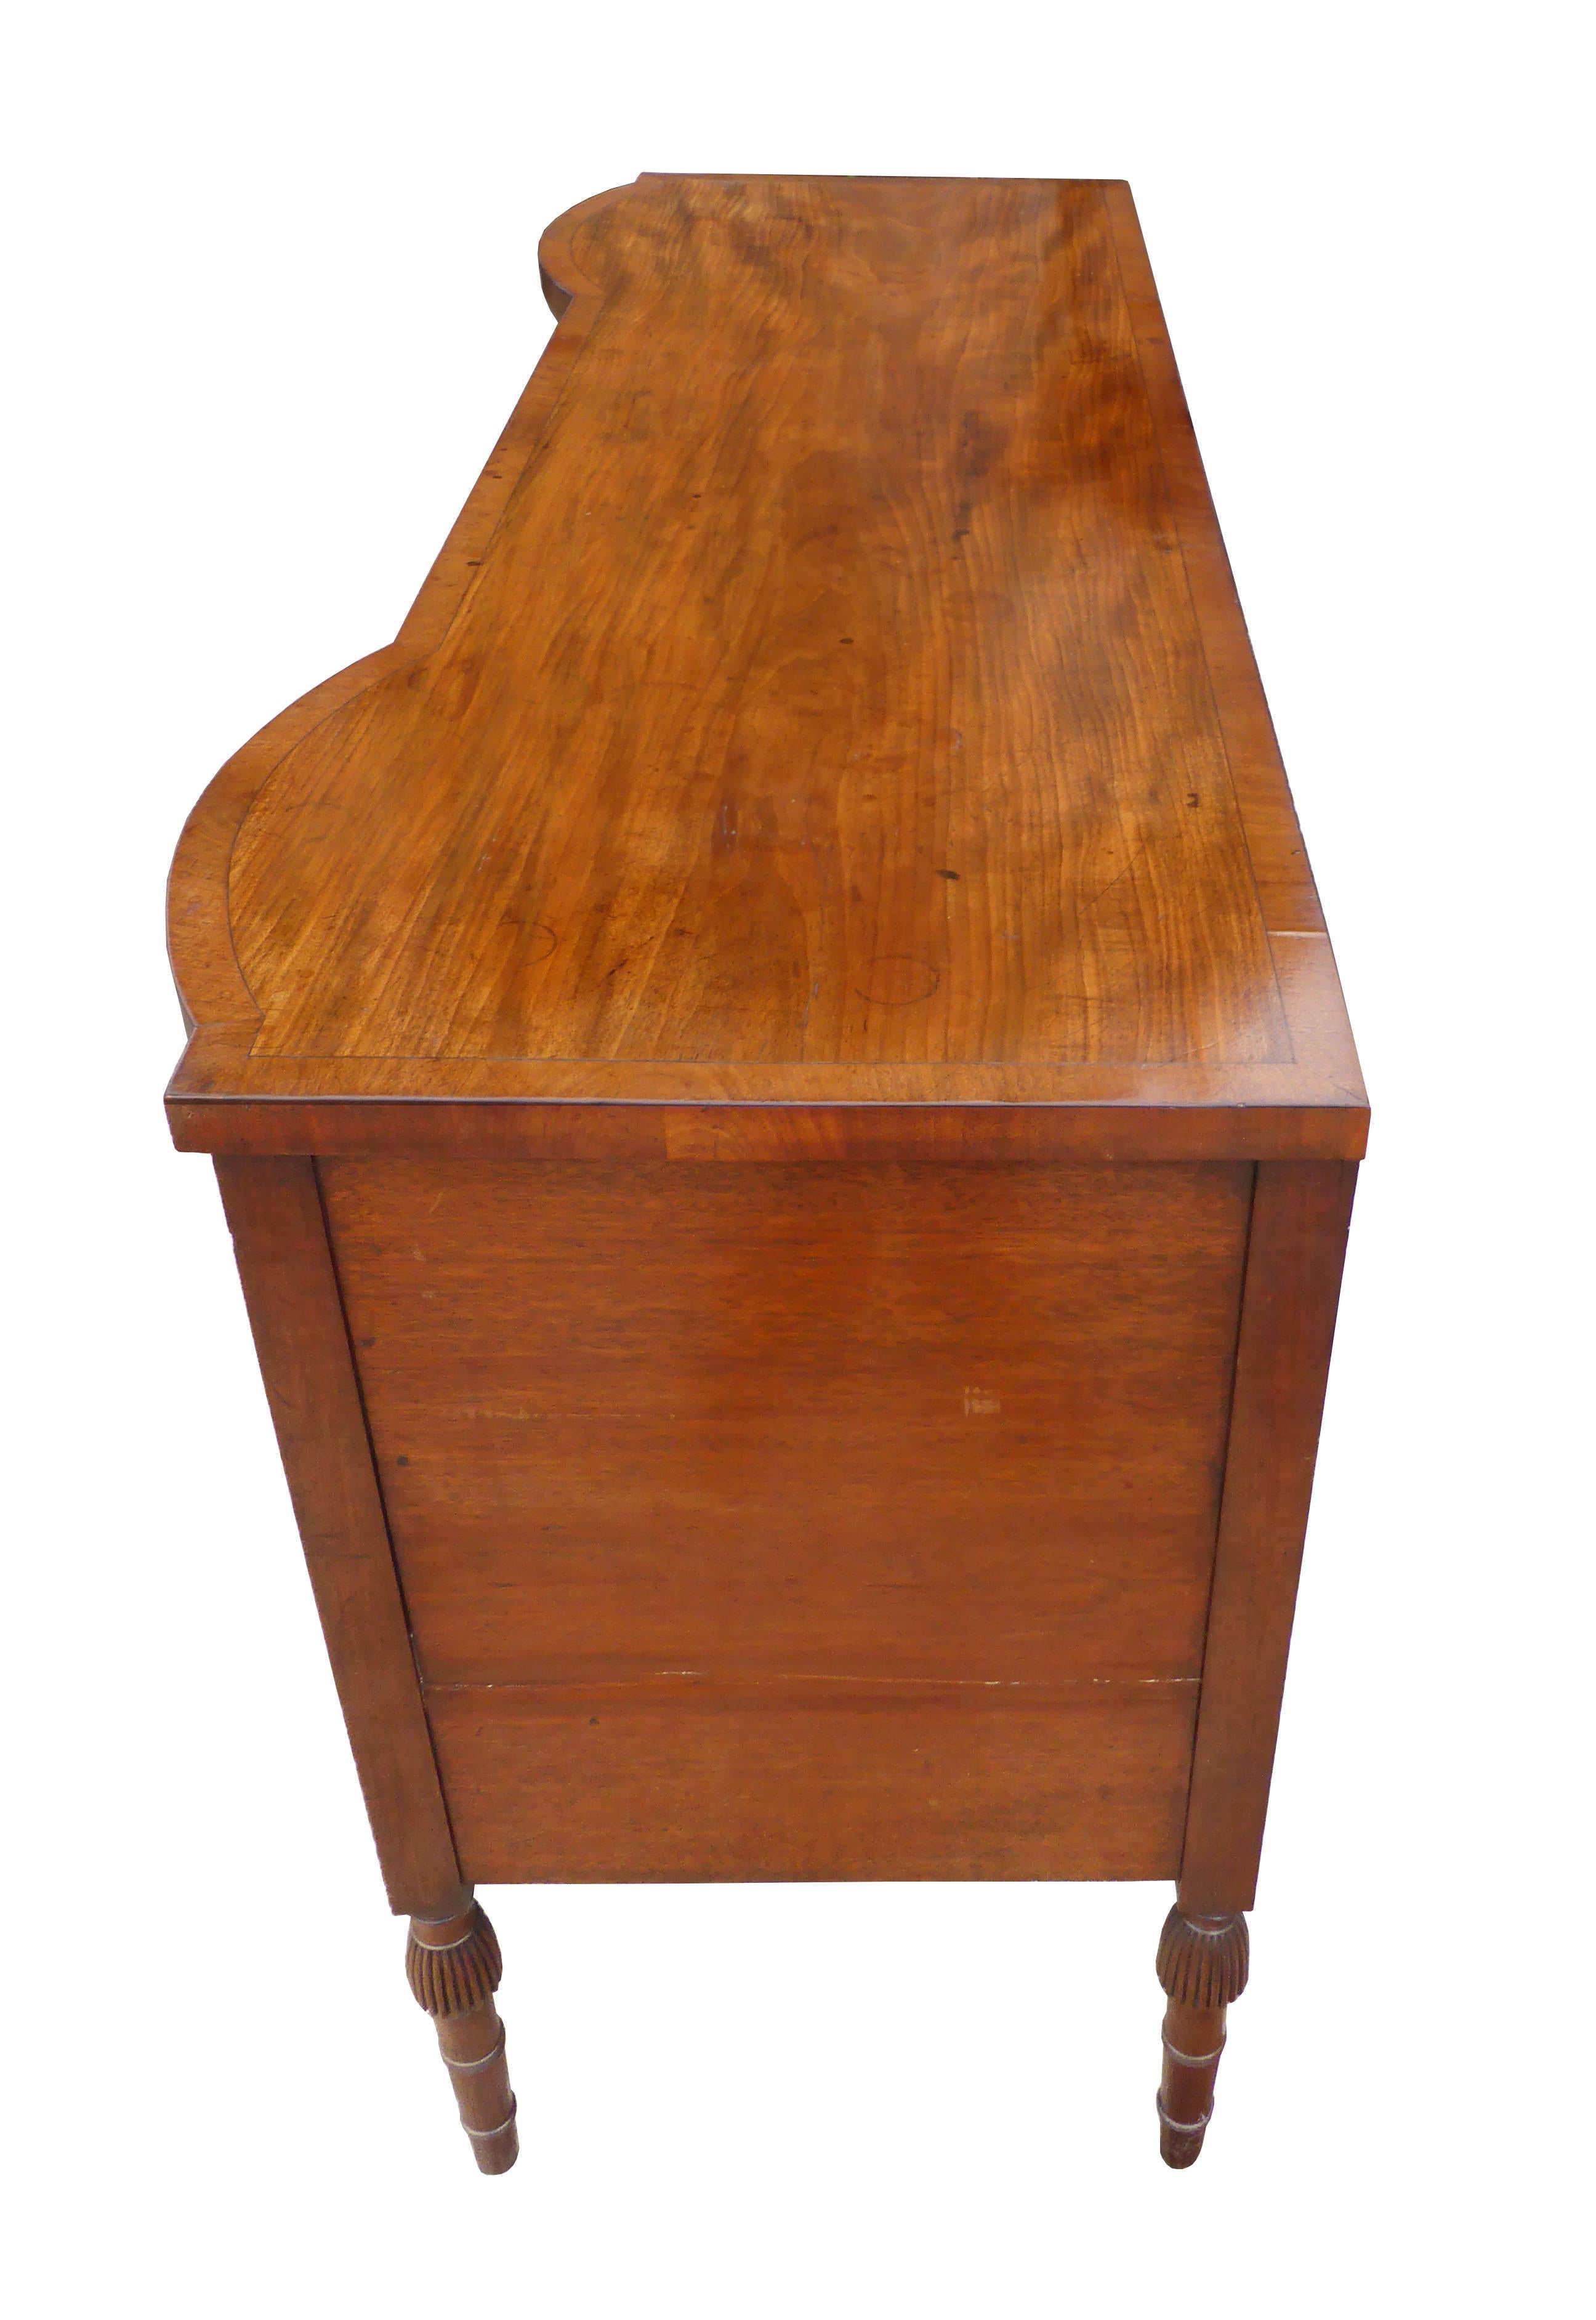 For sale is a good quality George III mahogany sideboard. The sideboard has three drawers across the top, each with ring handles. These are above to bowed cupboards, one opening to reveal a fitted interior for bottles etc. In the centre is a small